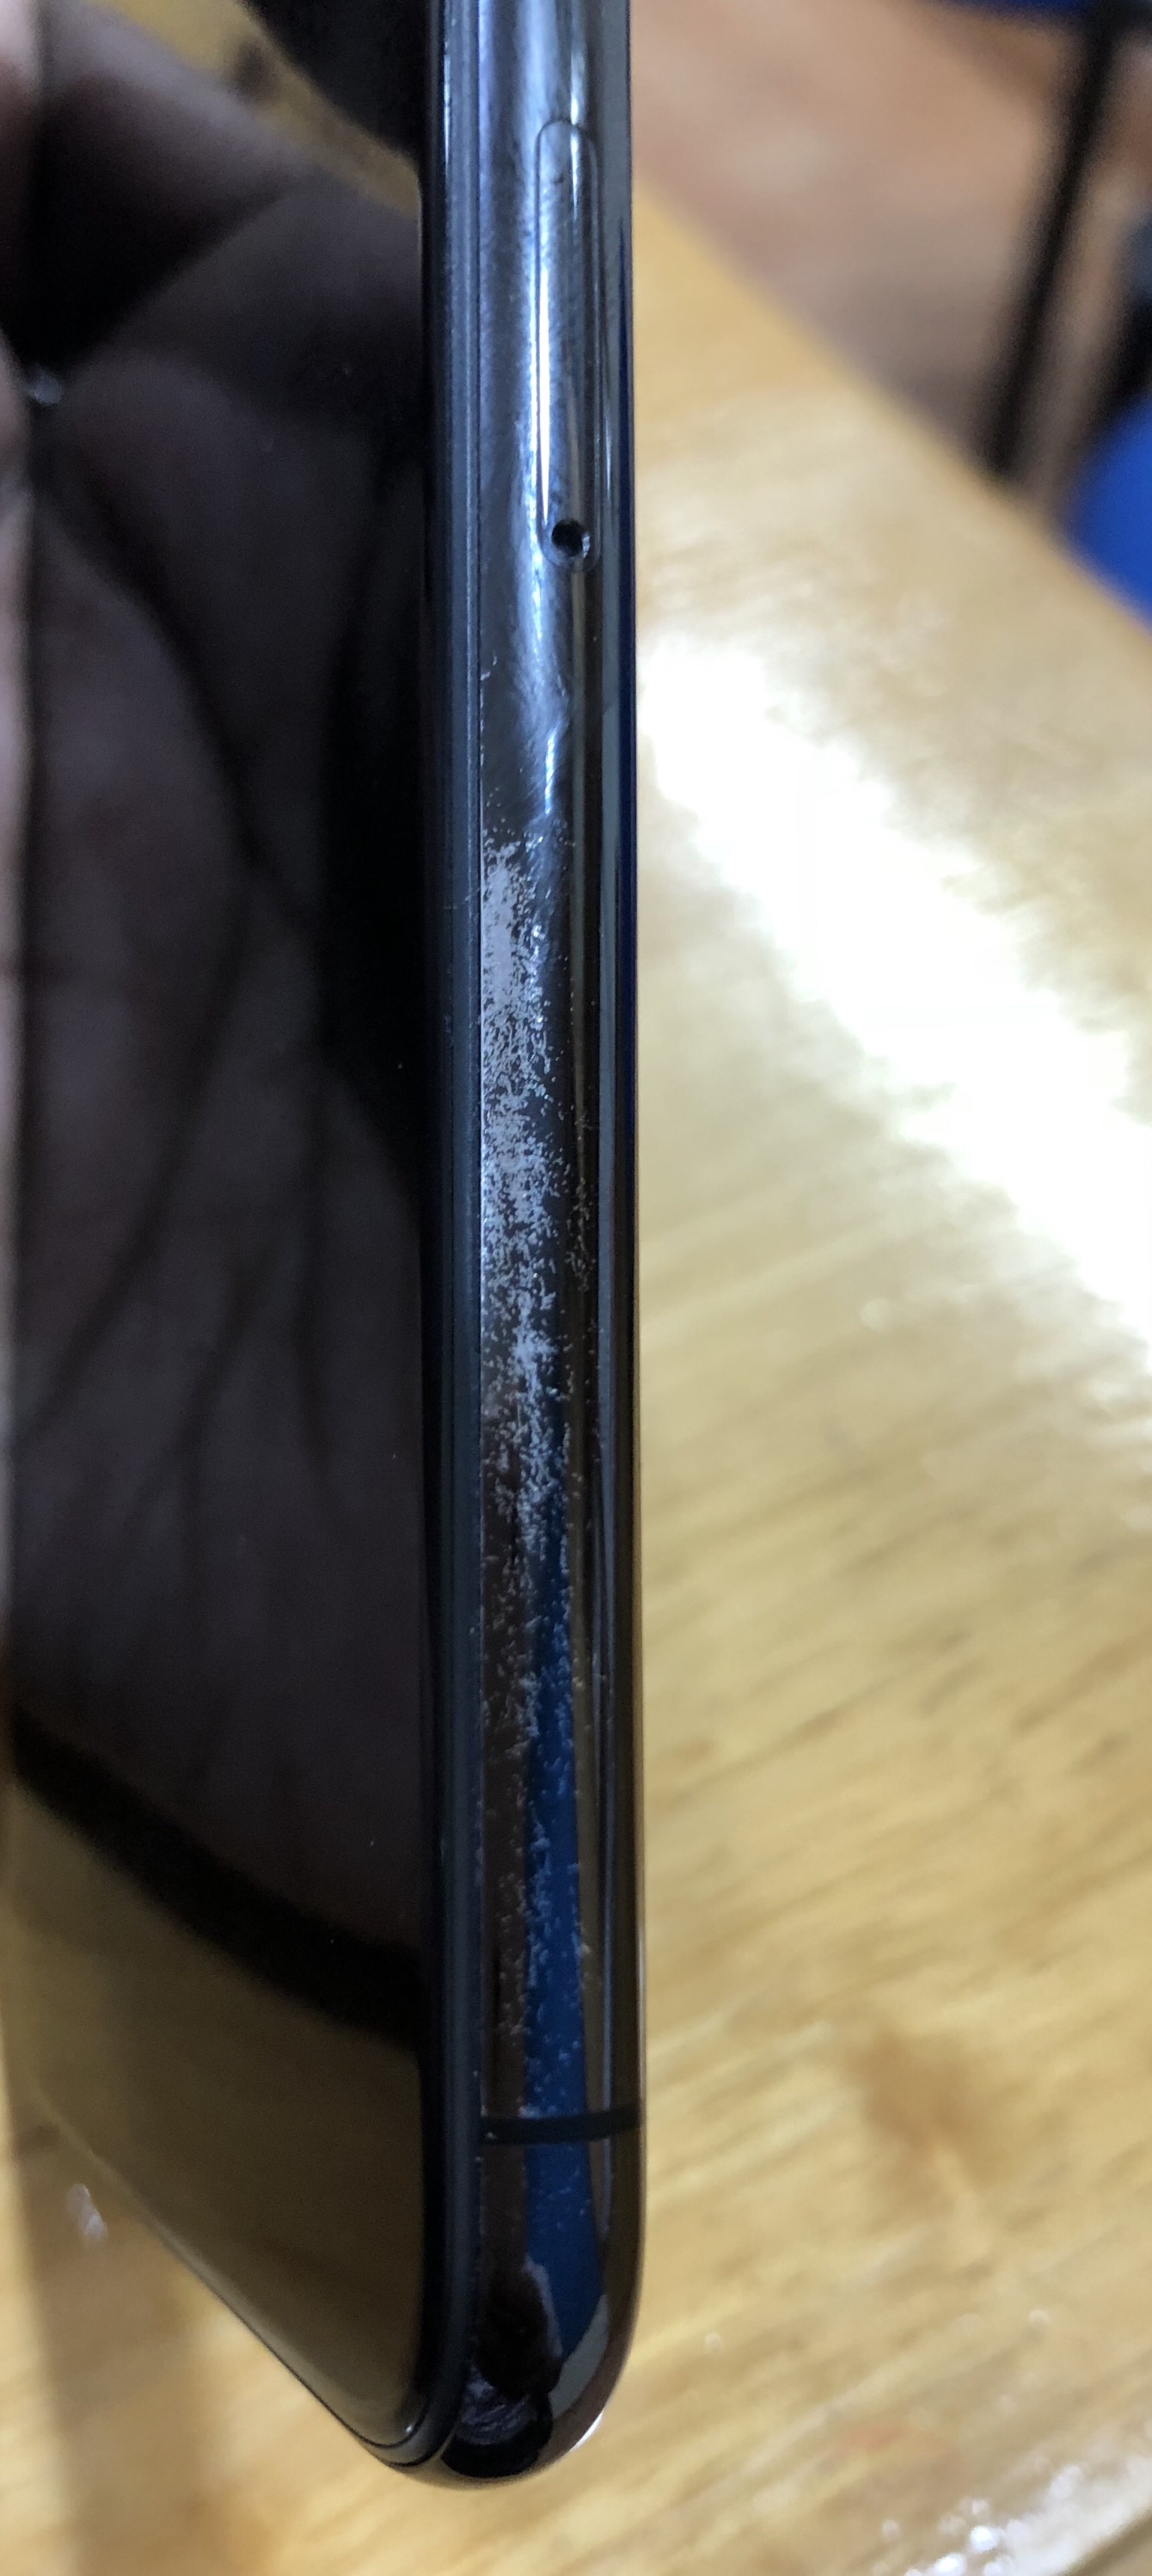 Download Iphone X Side Coating Fading Away Apple Community